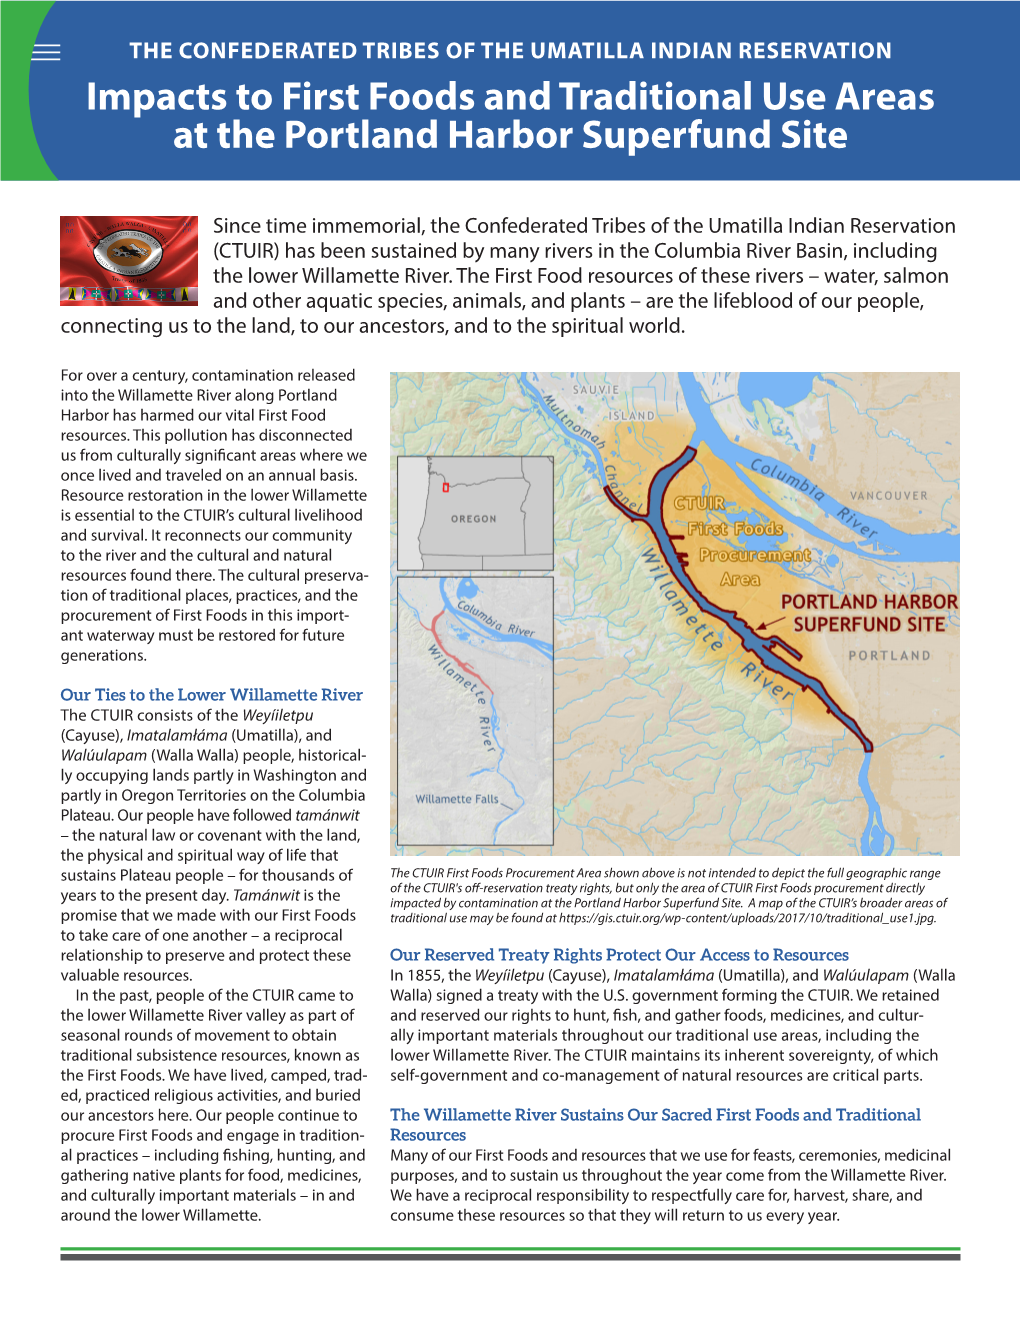 Impacts to First Foods and Traditional Use Areas at the Portland Harbor Superfund Site